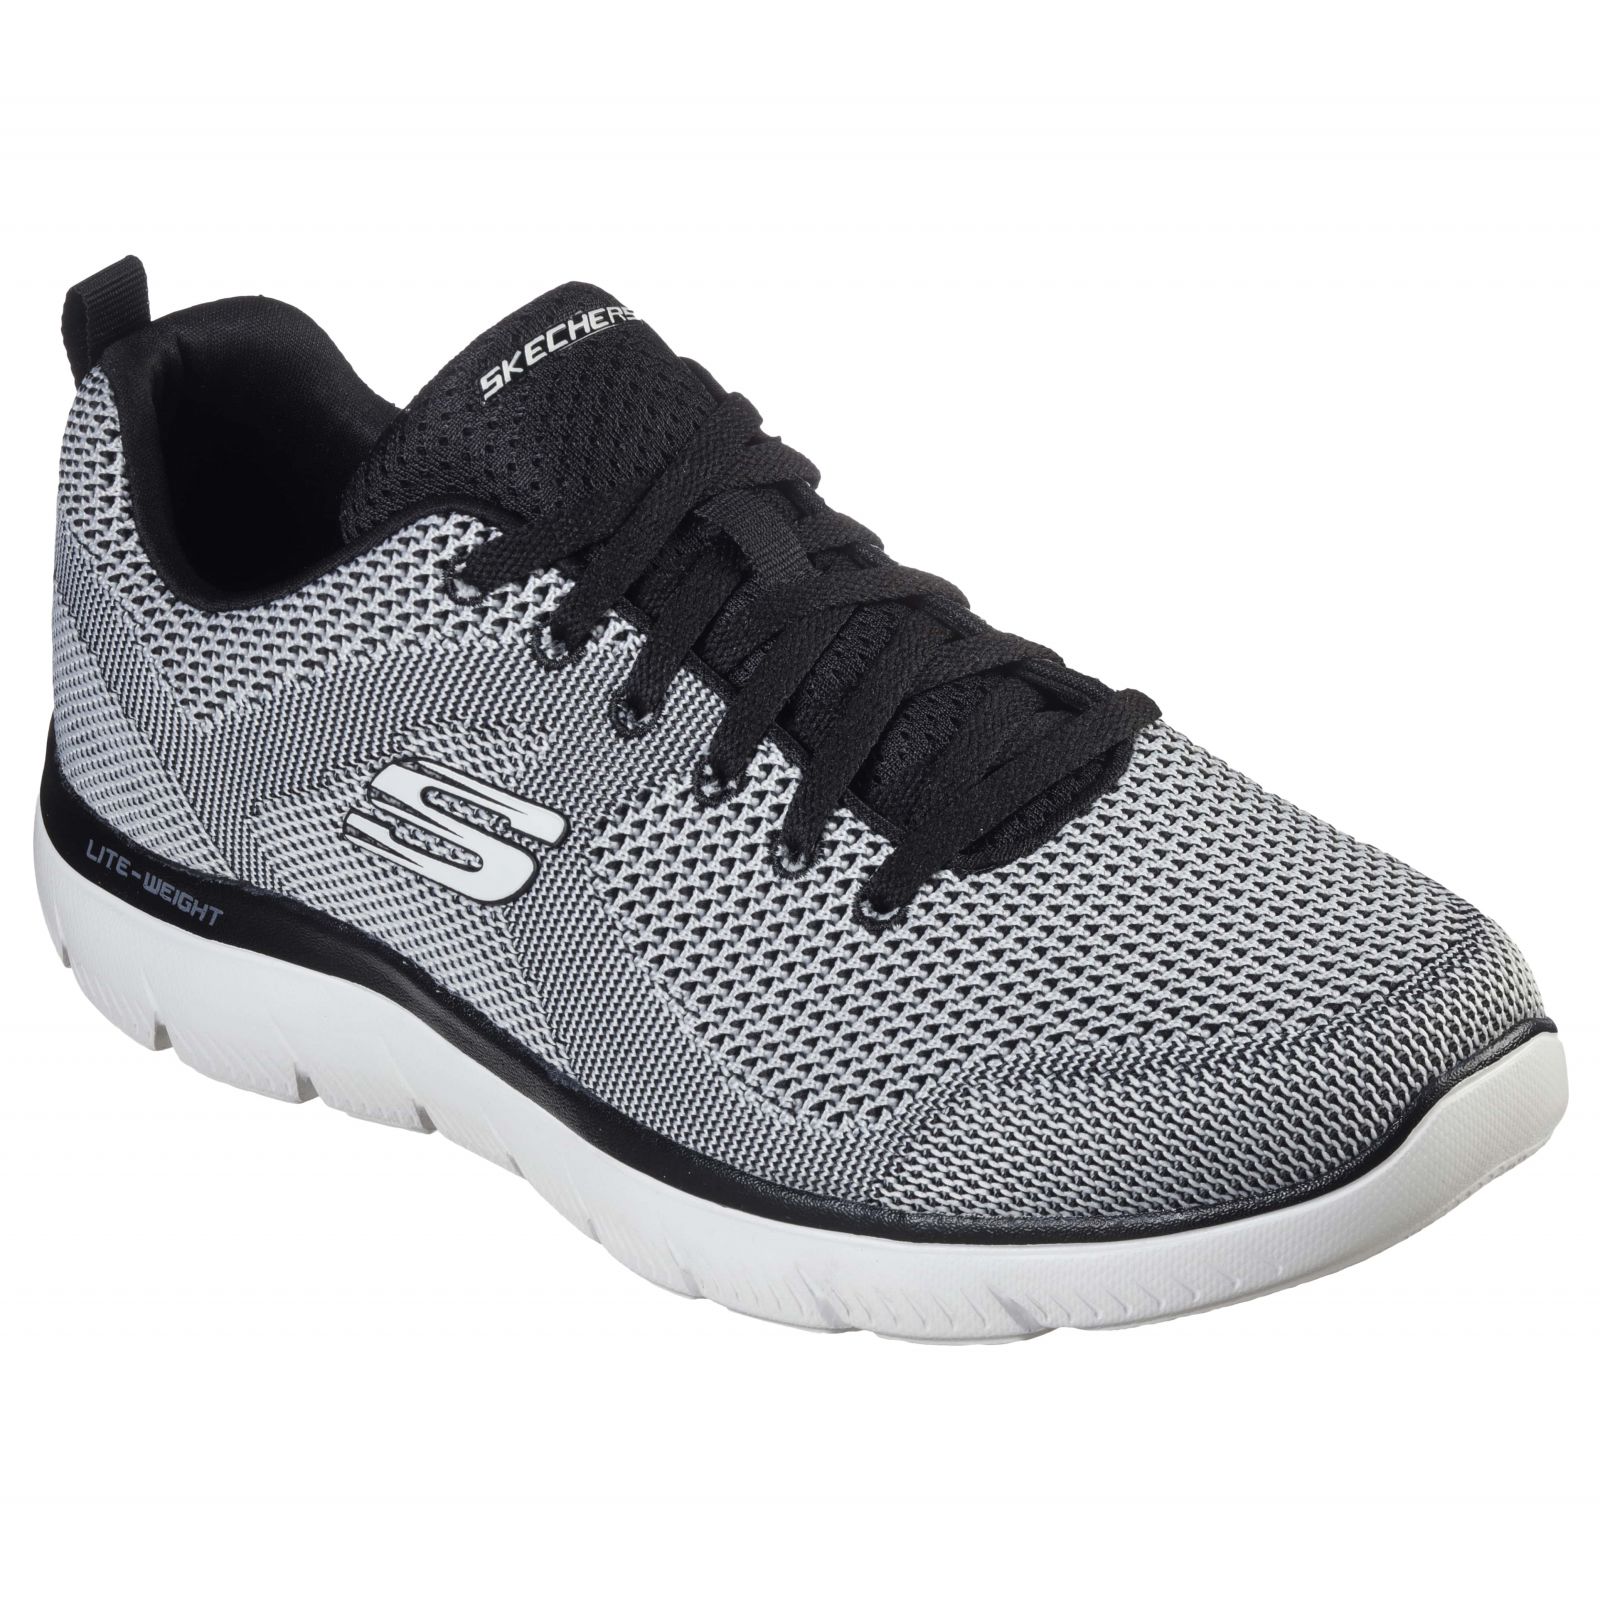 skechers shoes with memory foam insoles